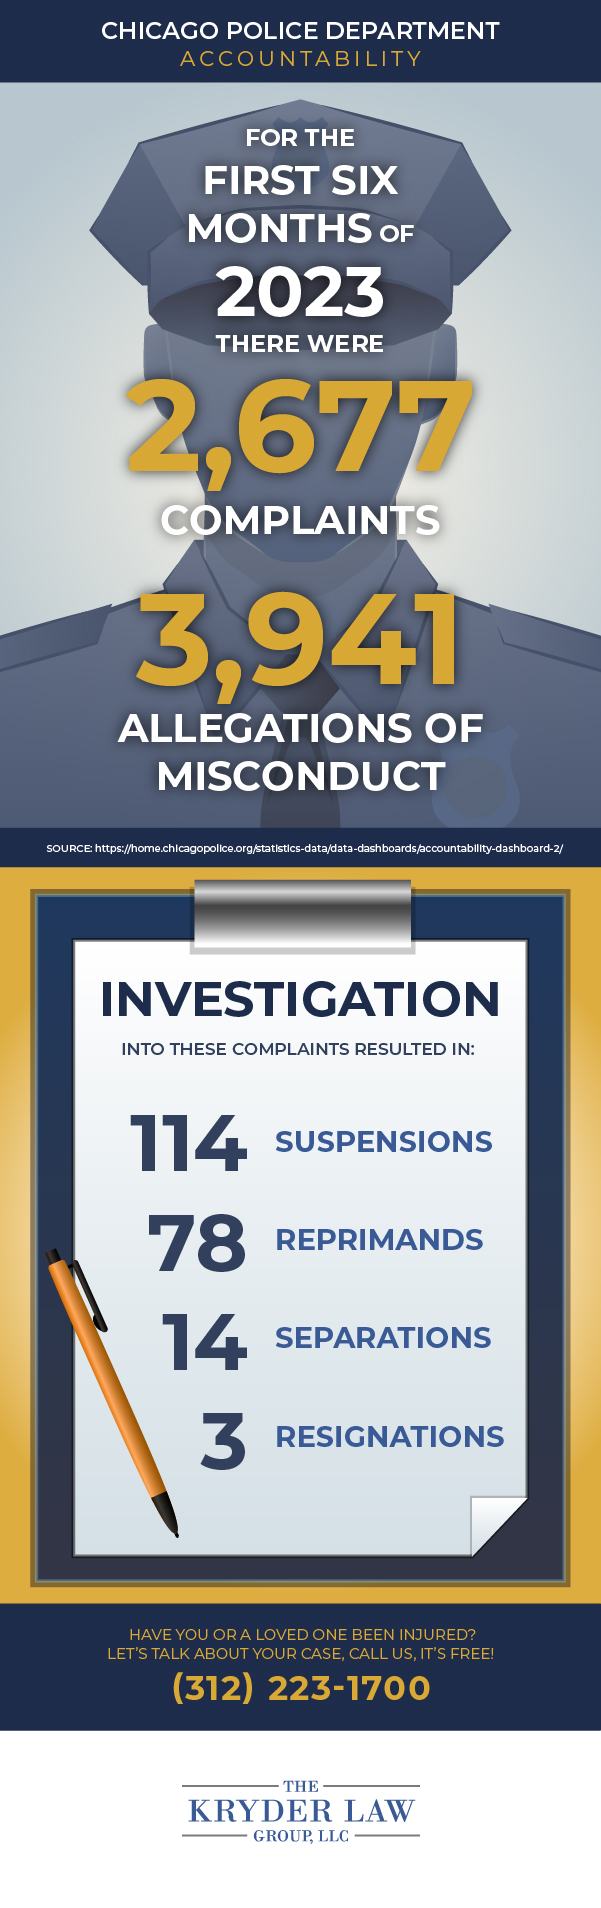 Chicago Police Department Accountability